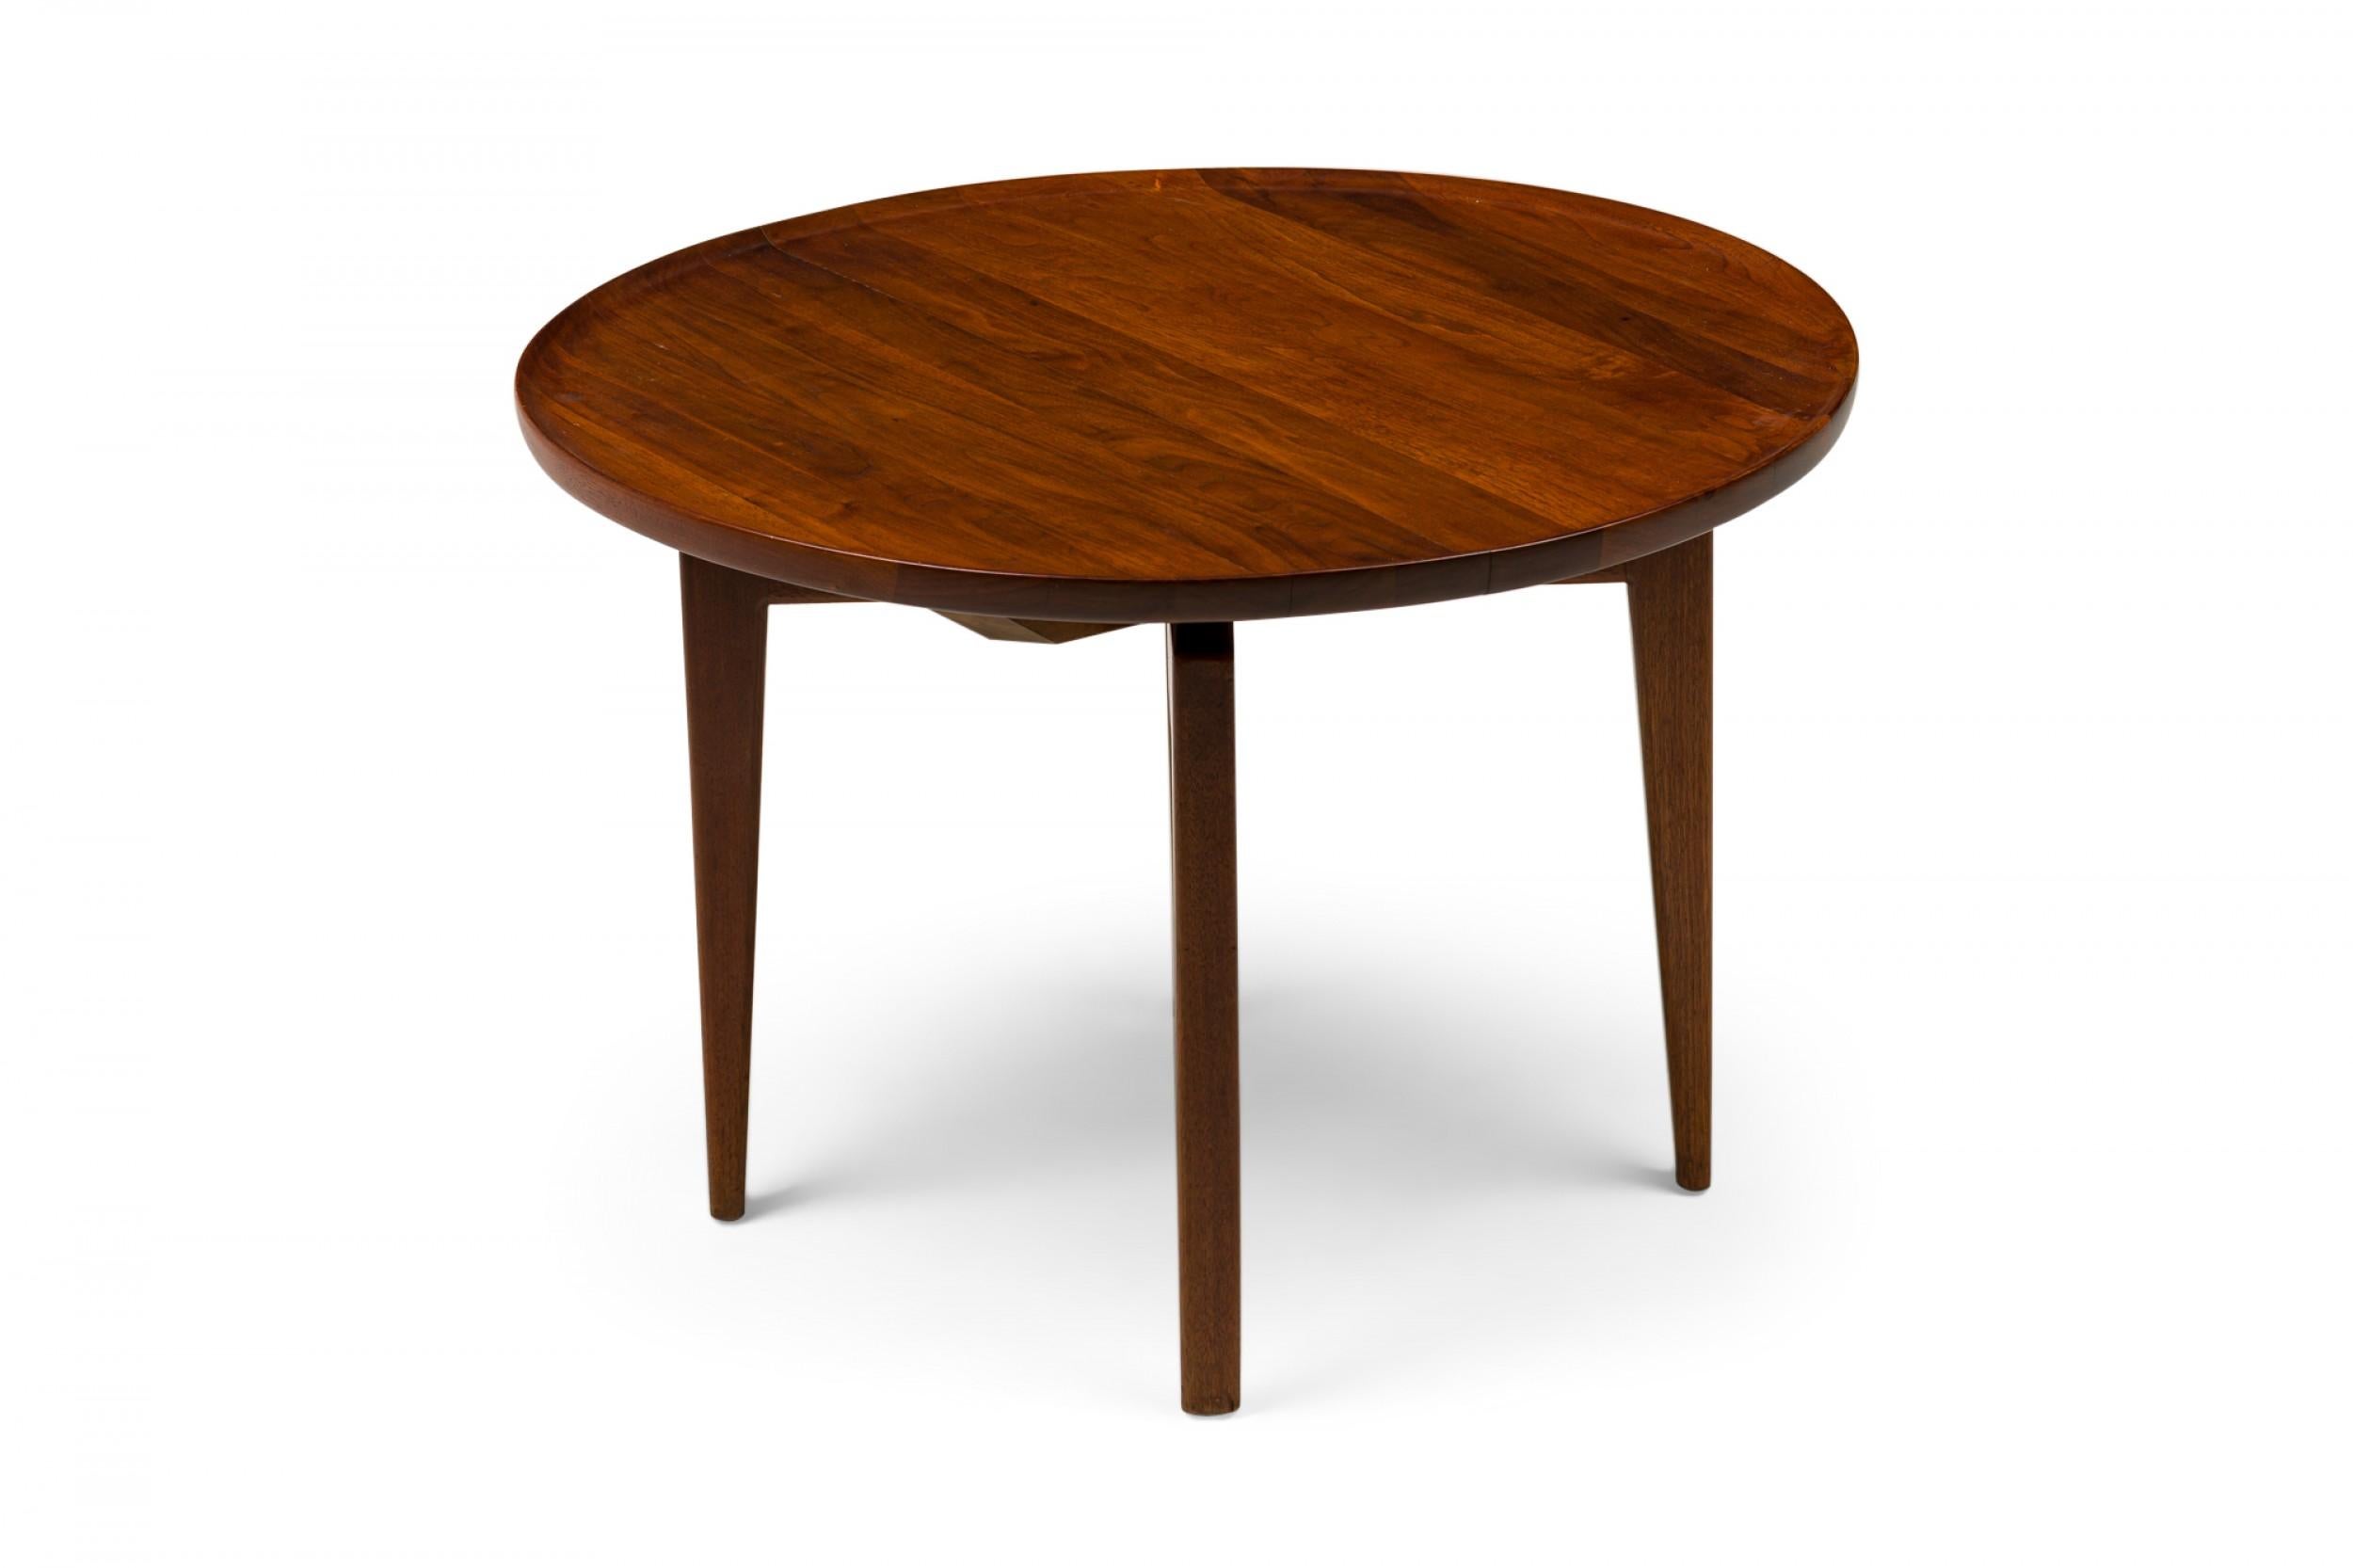 Danish mid-century end / side table with a revolving circular wooden top with a shallow lip, resting on four square tapered wooden legs. (Jens Risom).
  